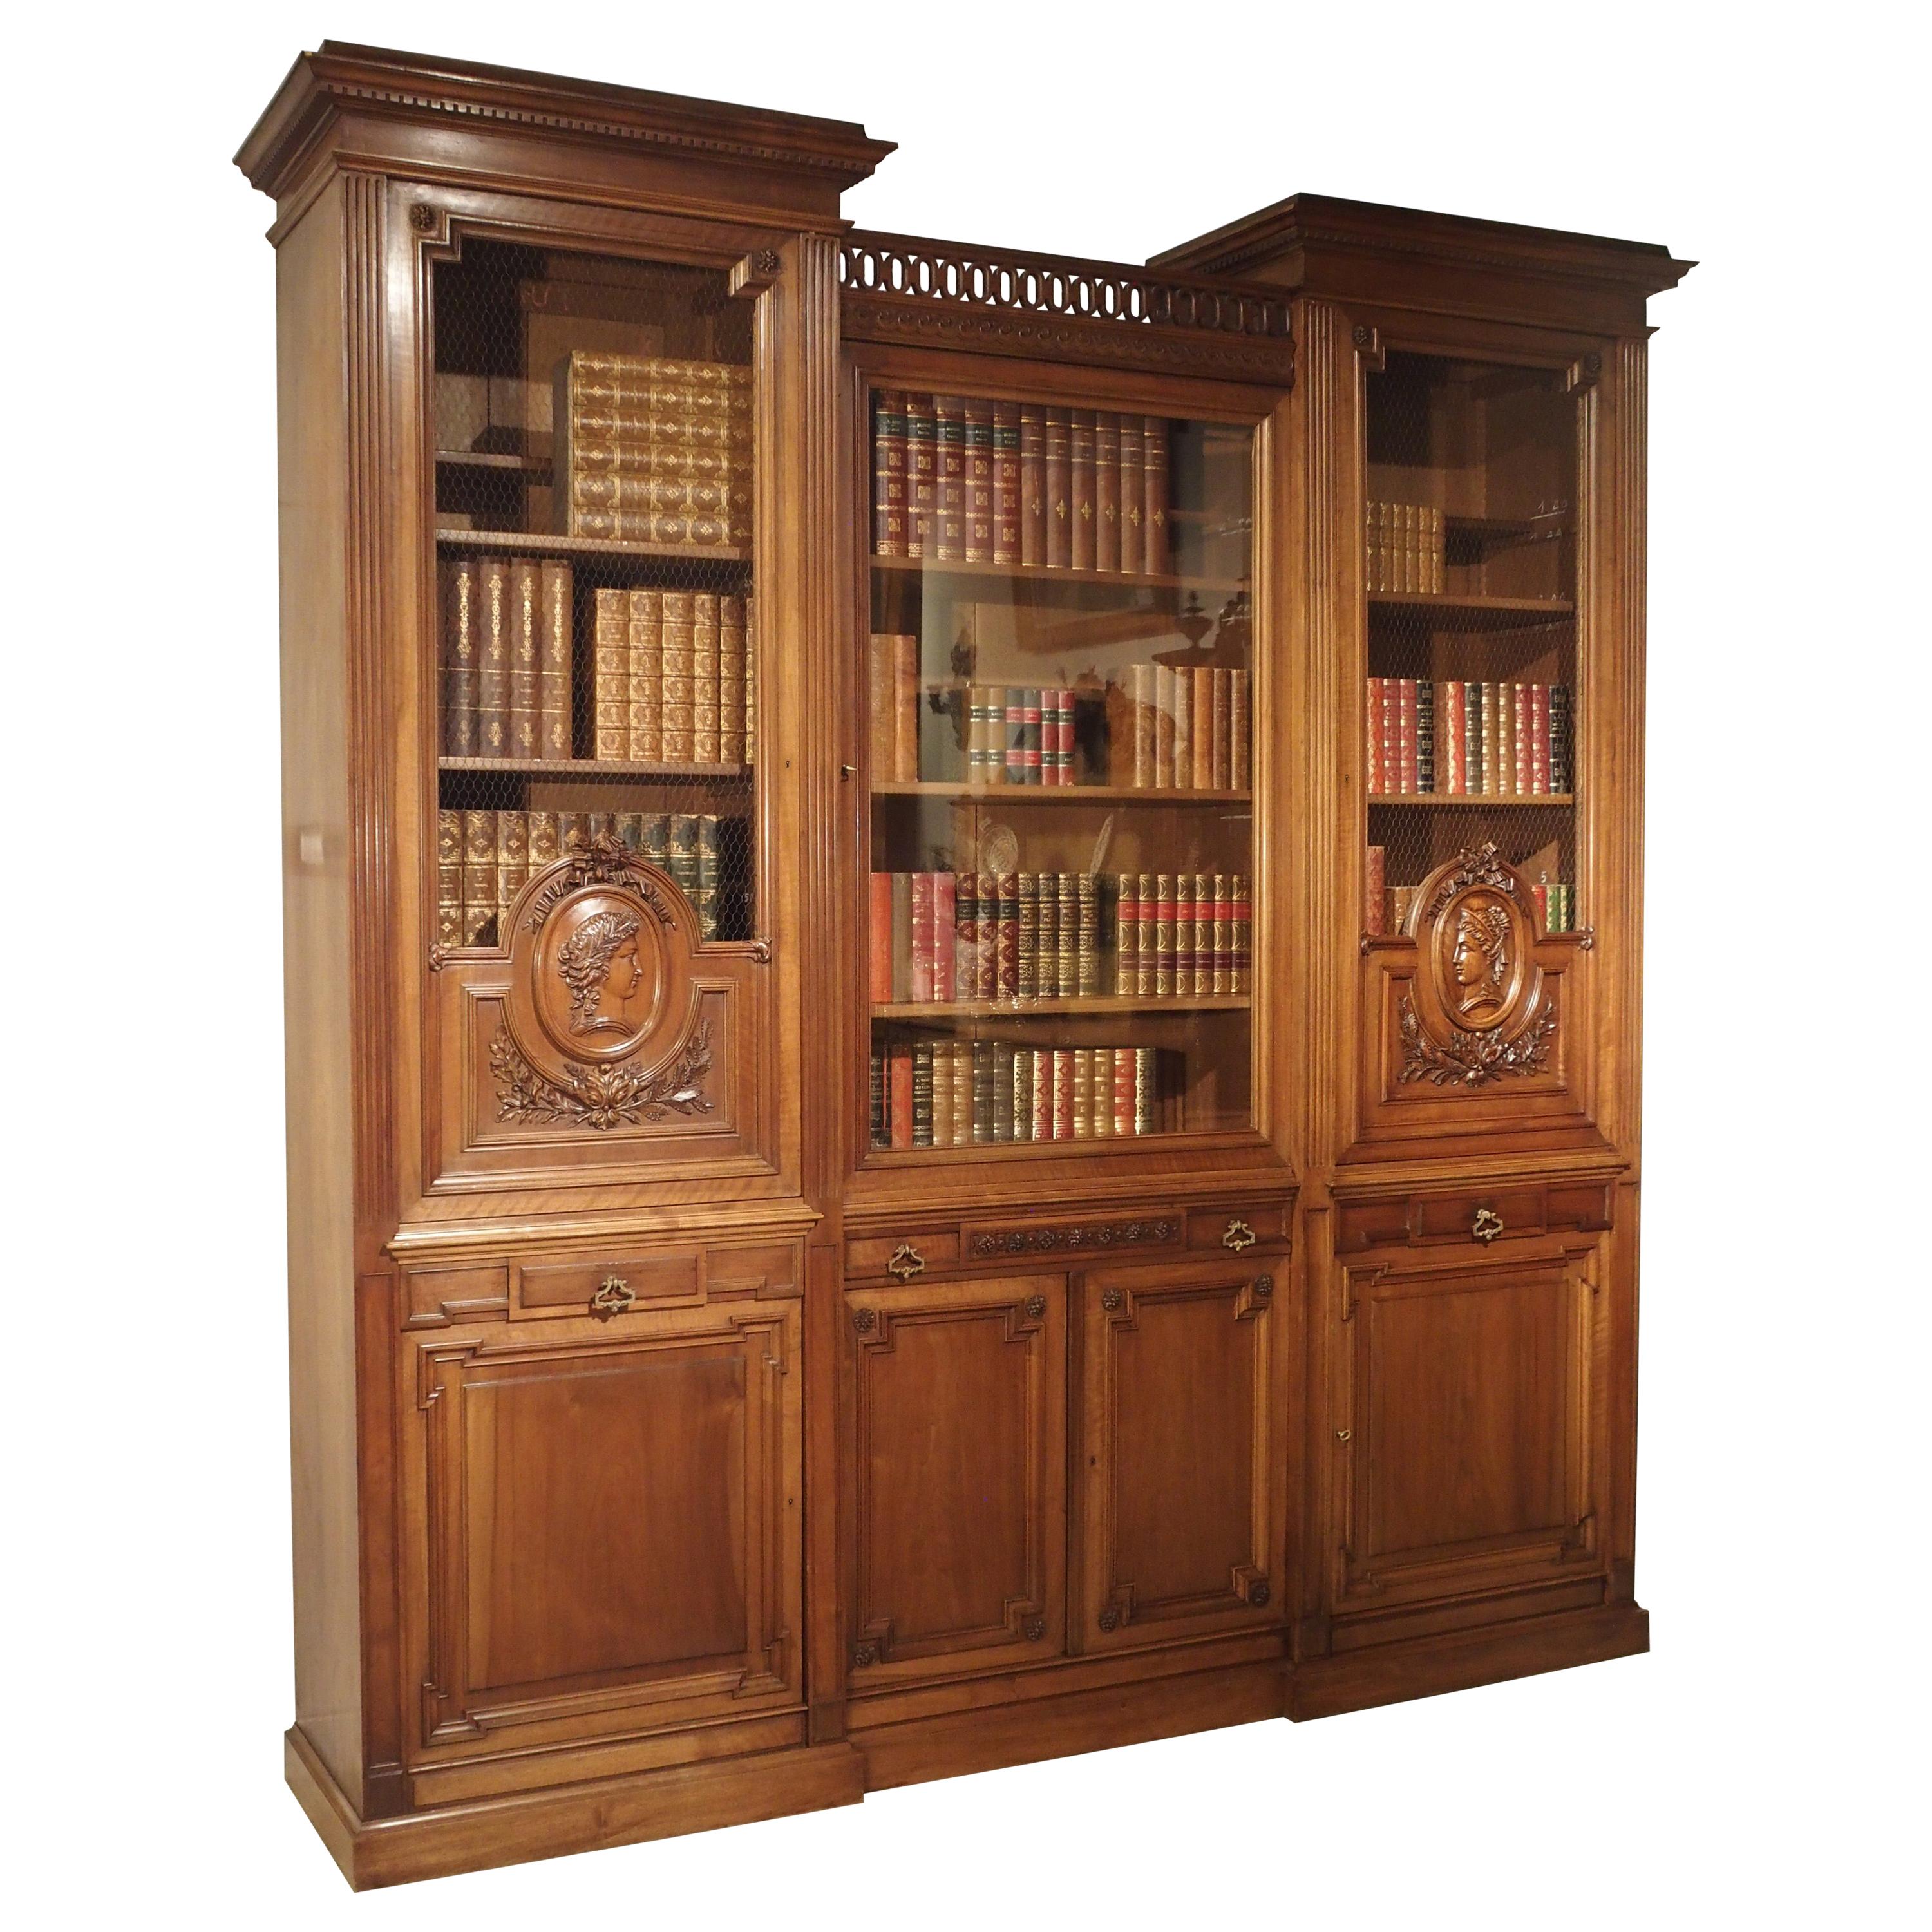 Antique Walnut Wood Louis XVI Style Bibliotheque from France, circa 1880